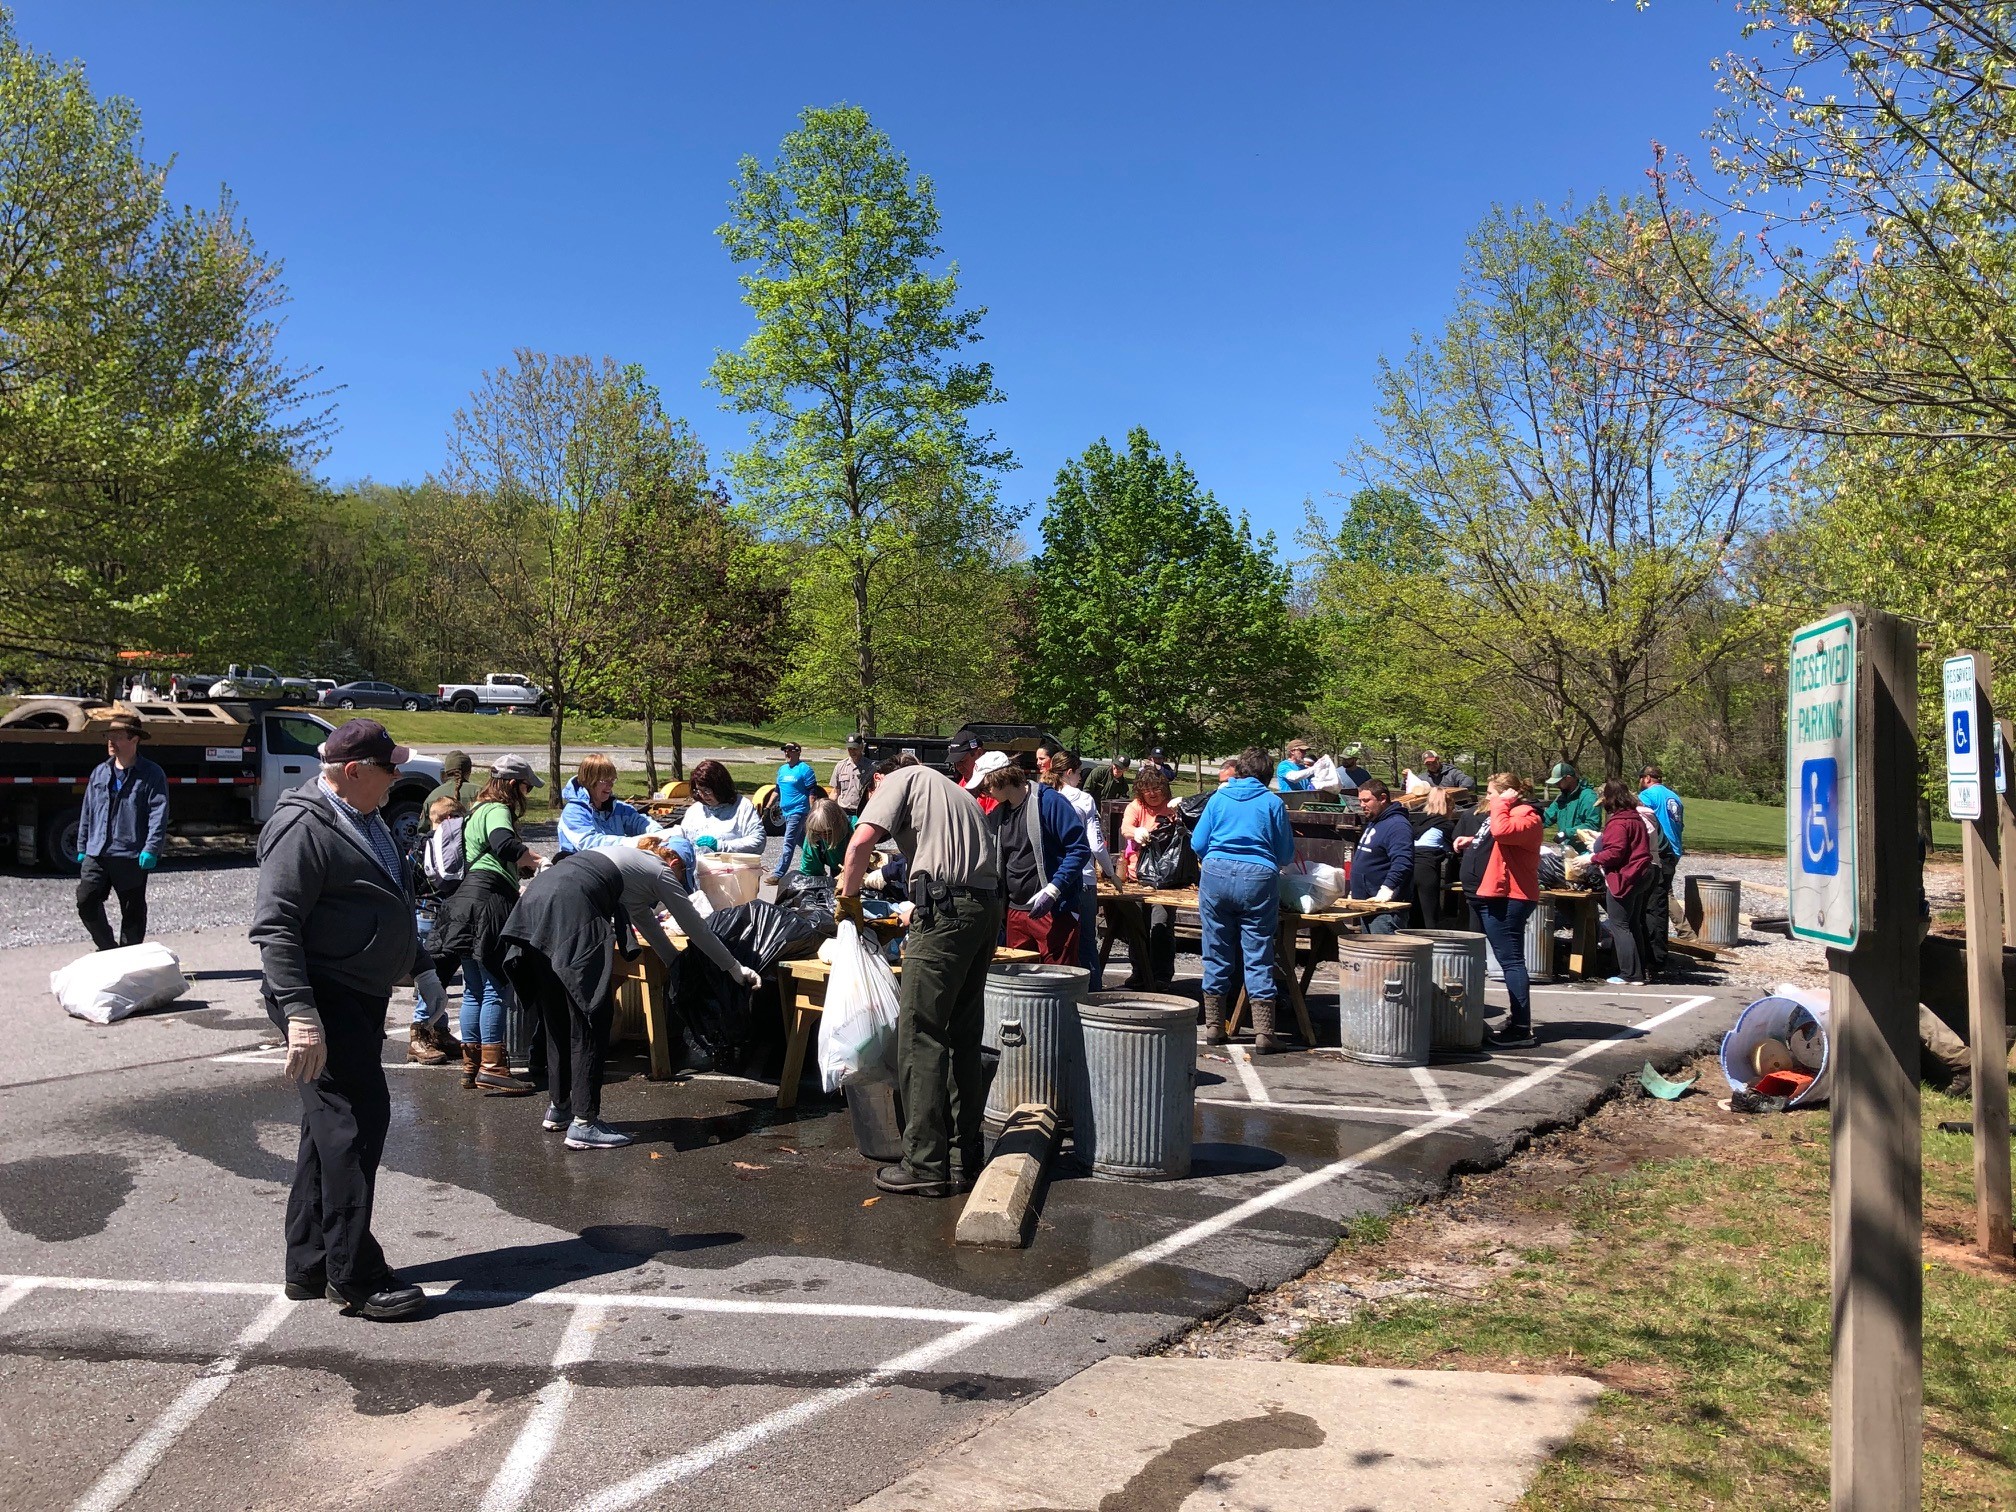 RaystownCleanup10 - Celebrating Earth Day in Pennsylvania